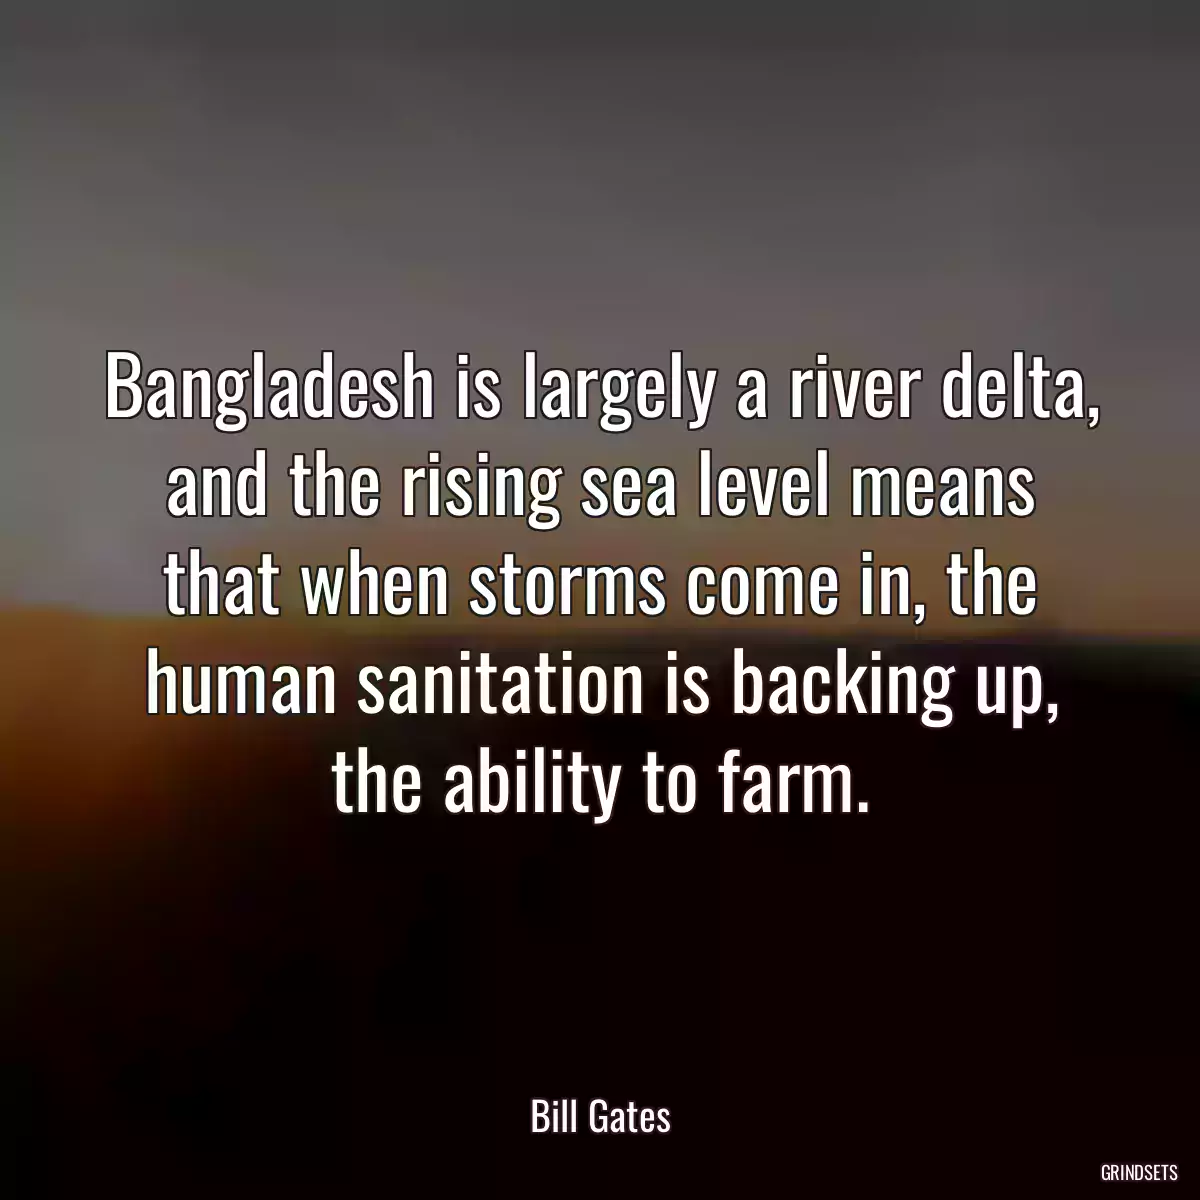 Bangladesh is largely a river delta, and the rising sea level means that when storms come in, the human sanitation is backing up, the ability to farm.